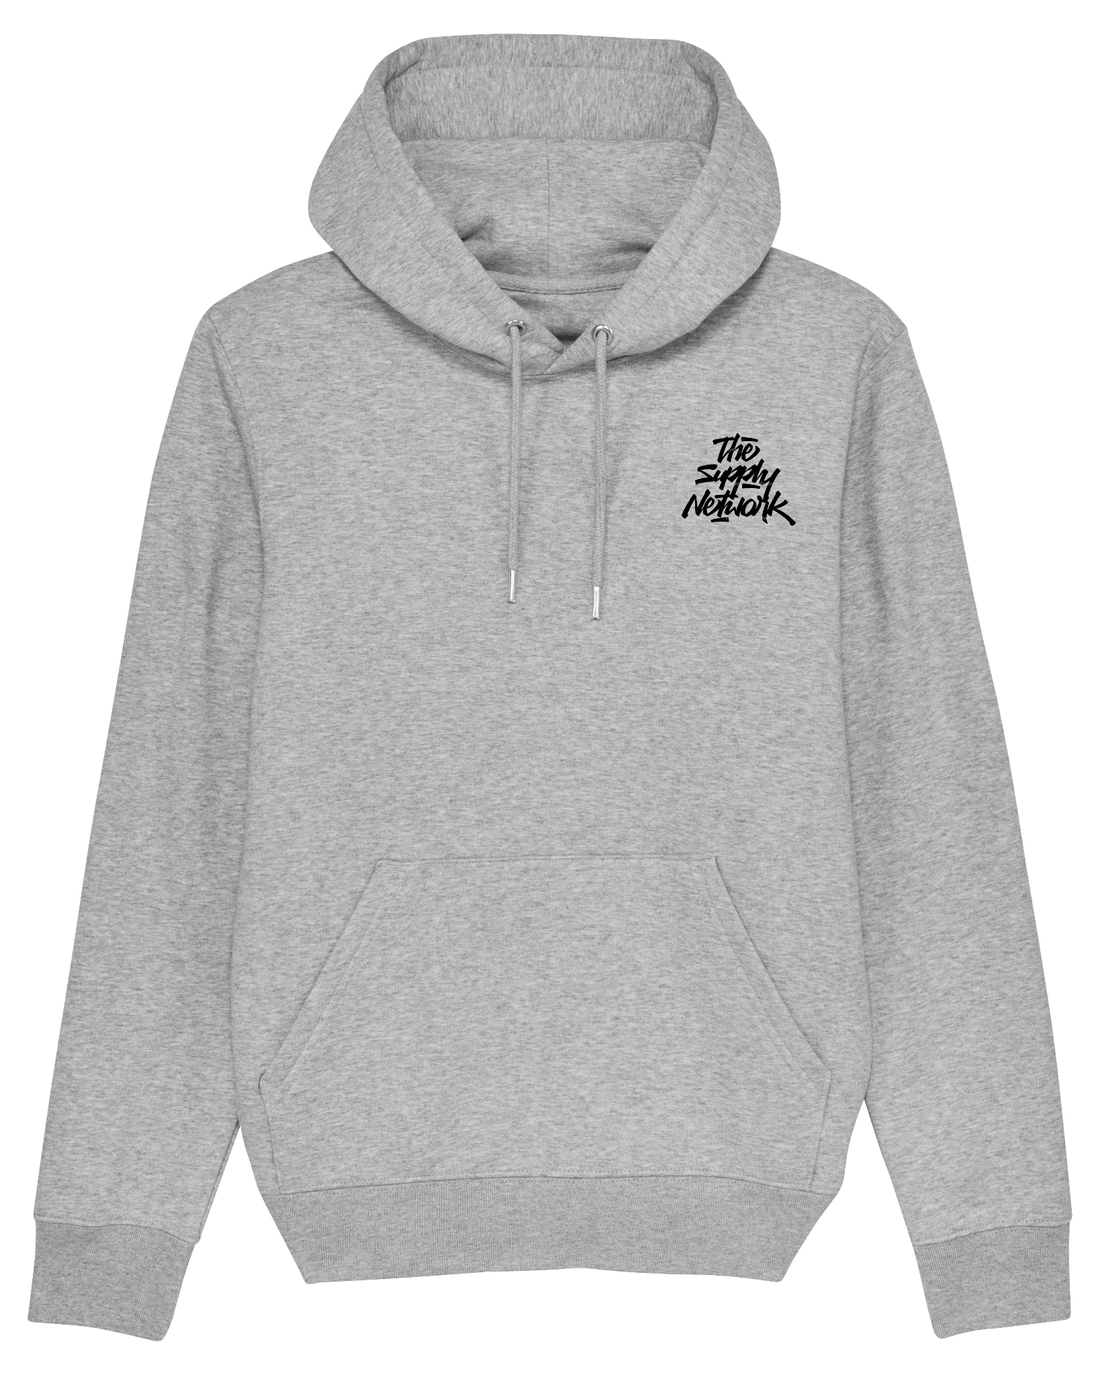 Grey skater Hoodie, The Supply Network Front Print